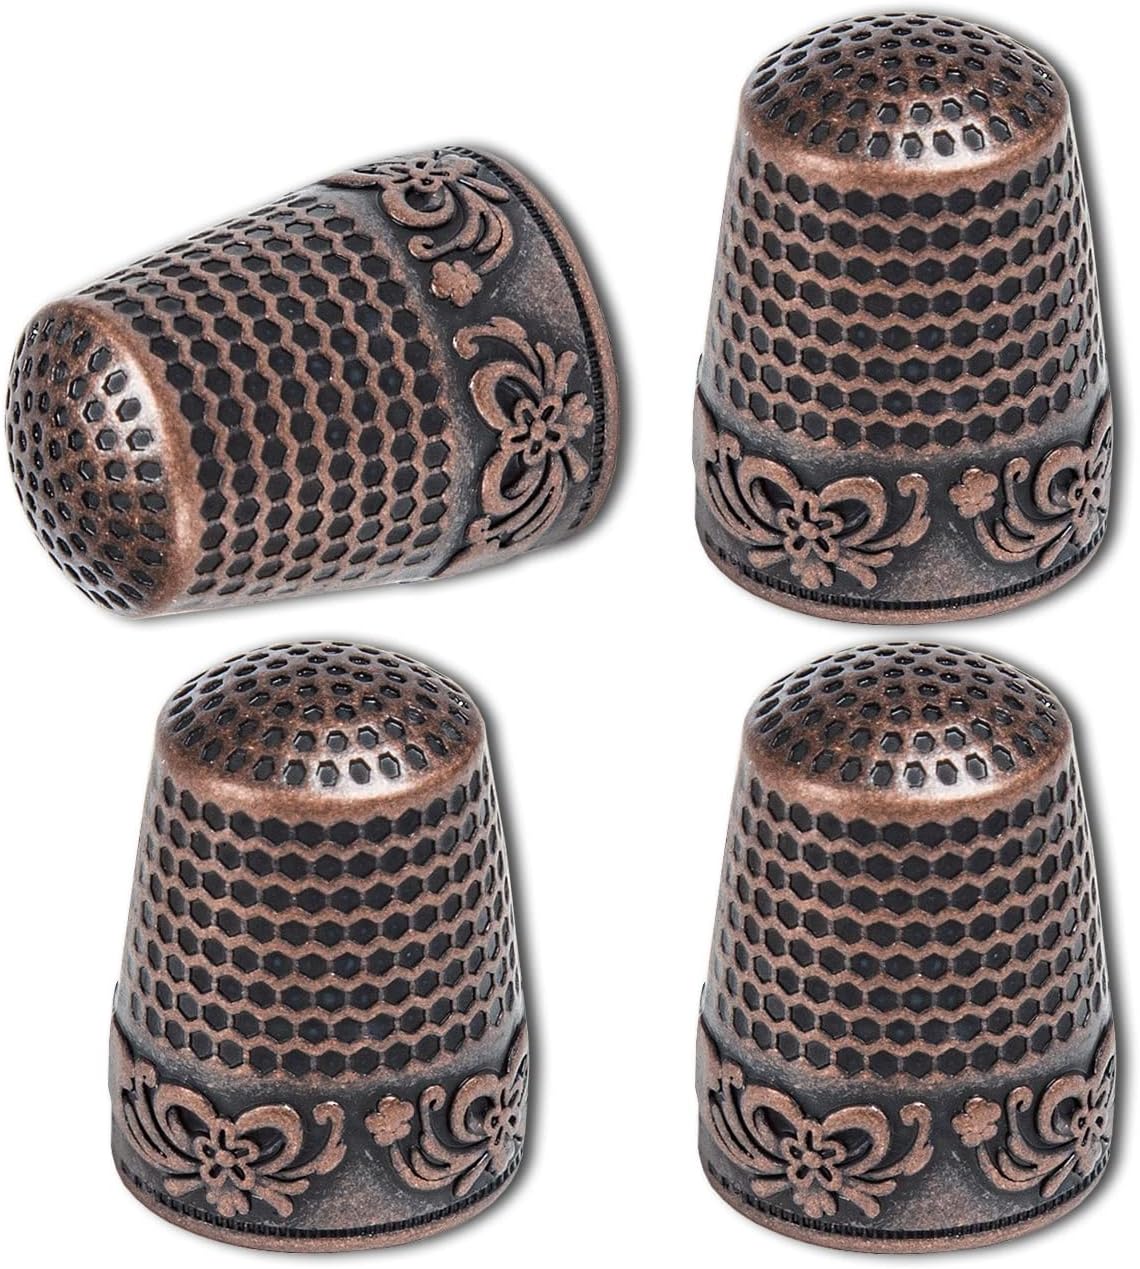 4 Pieces Leather Thimble Sewing Thimble Finger Protector Coin Thimble Pads  for Hand Sewing Quilting Knitting Pin Needles Craft DIY Tools, Finger